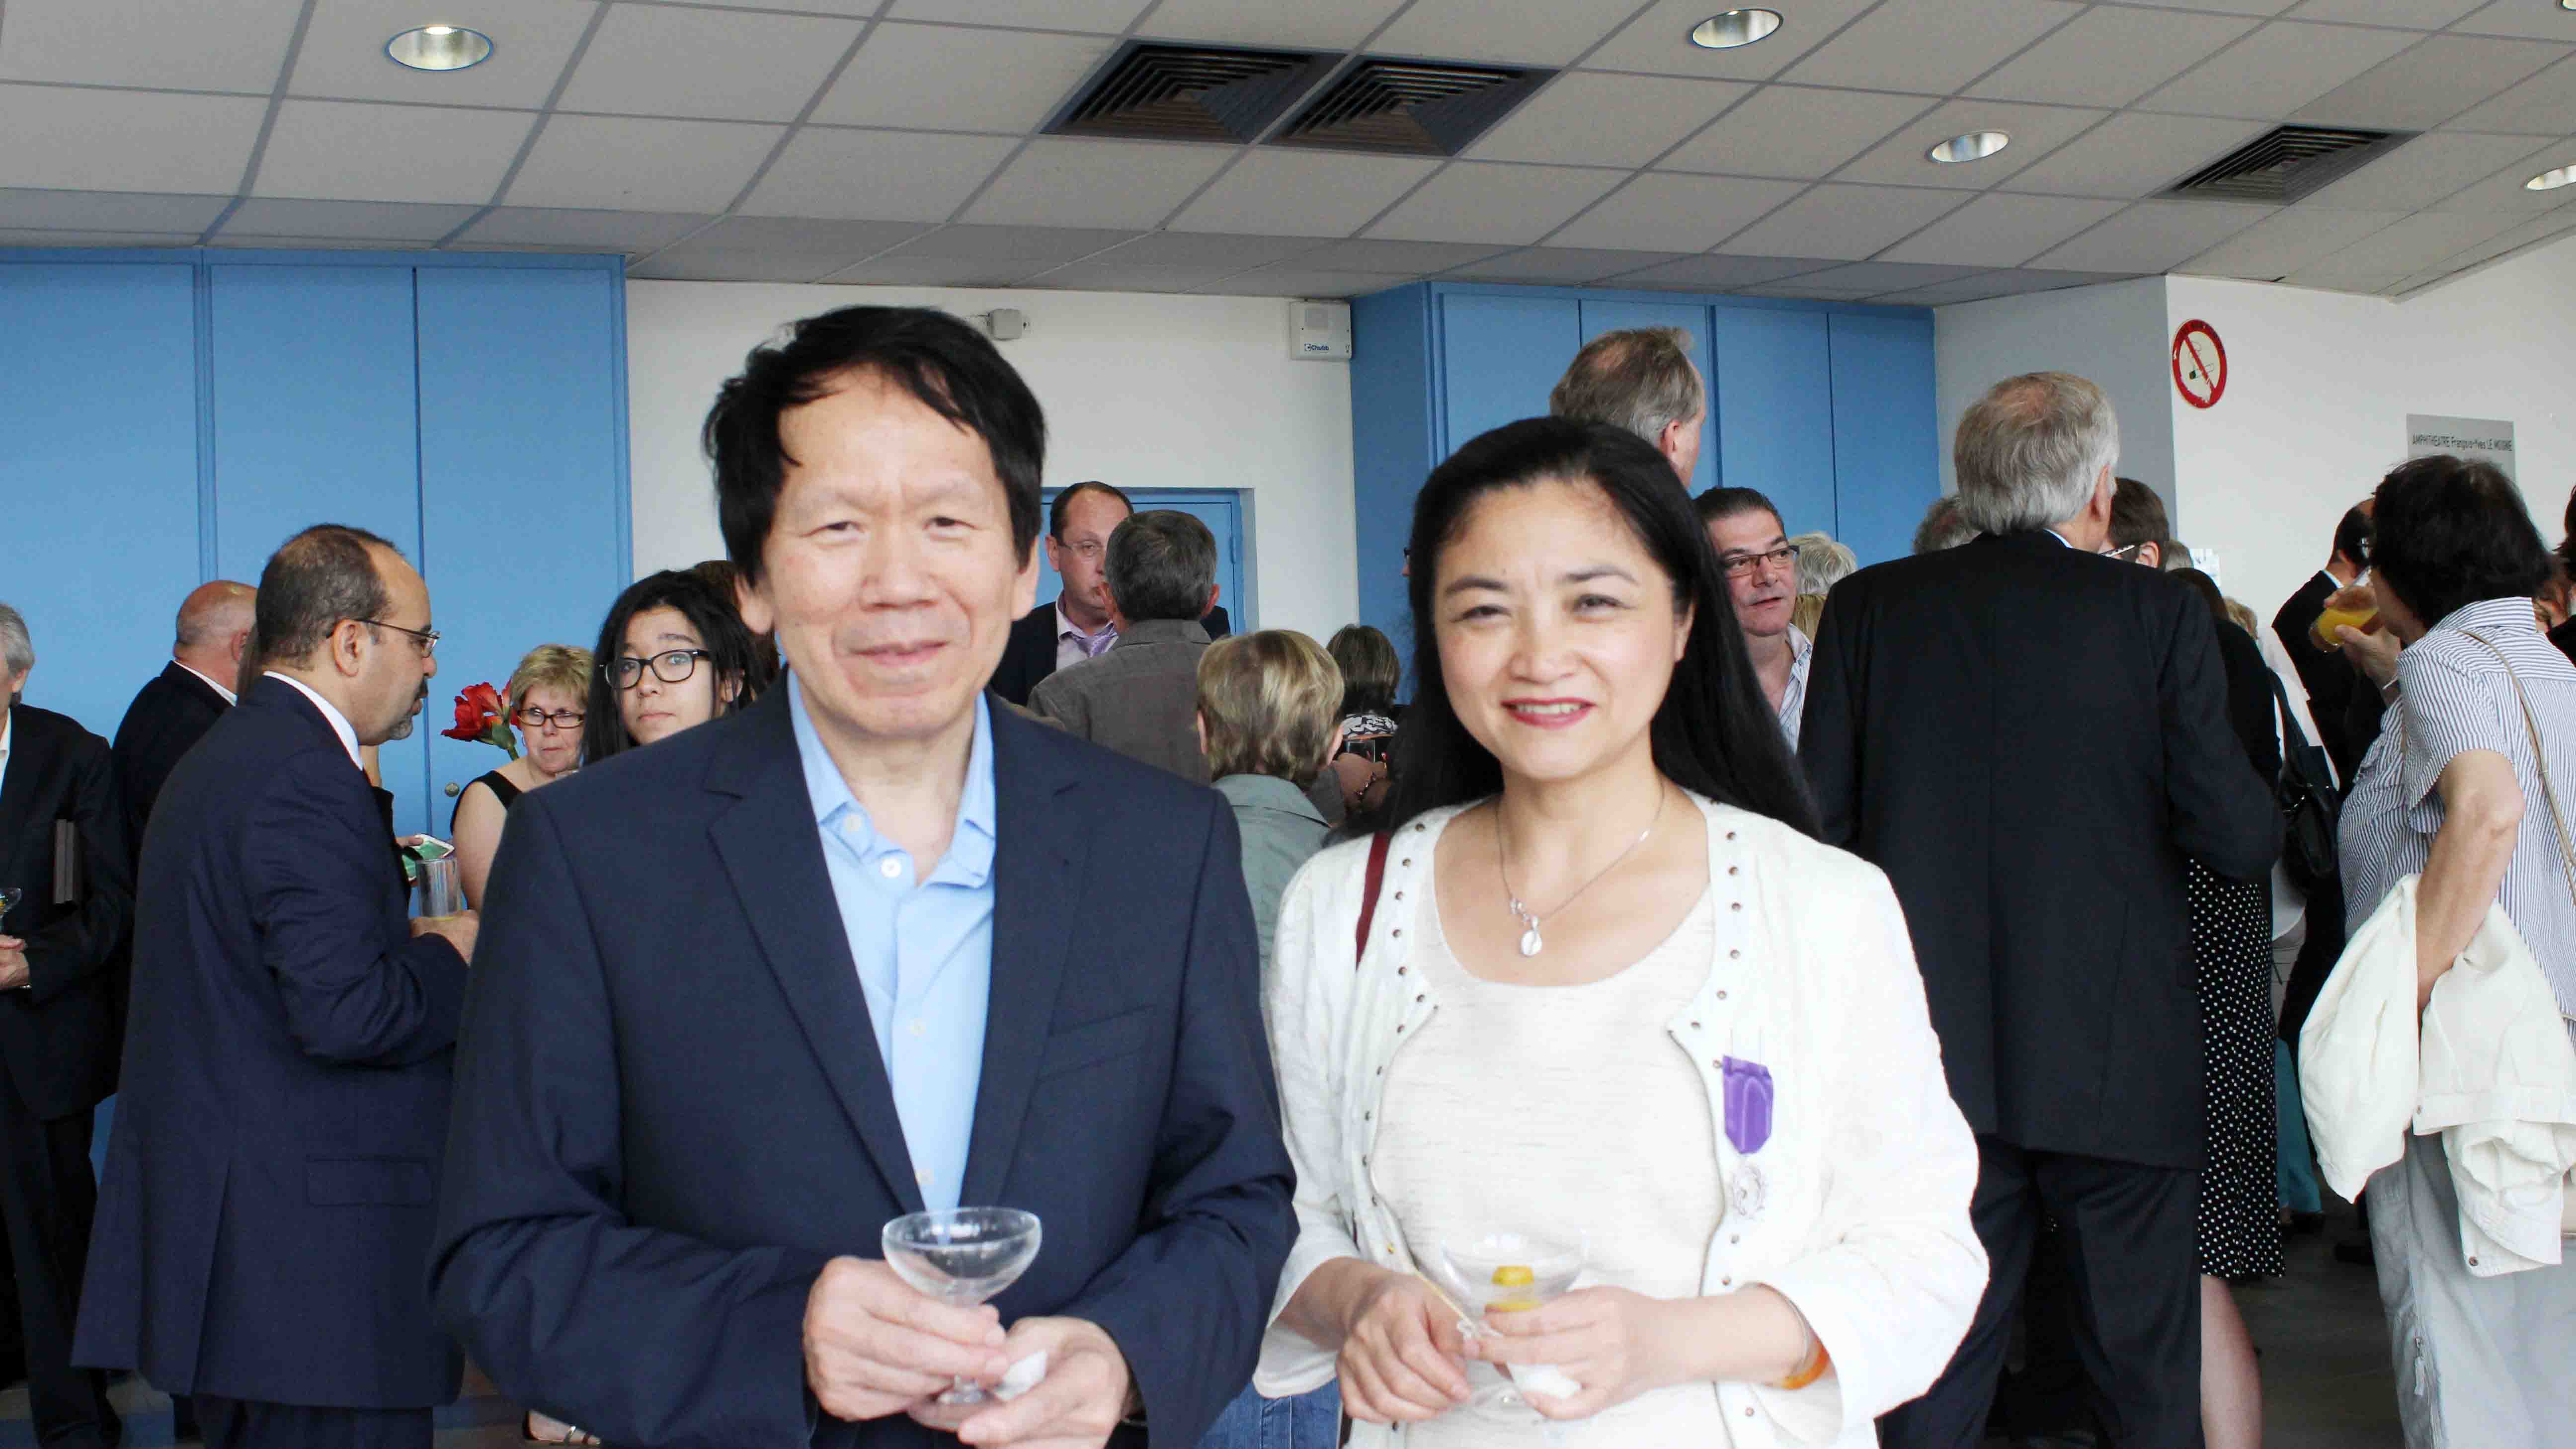 Prof. Le Thi Hoai An and her husband, Prof. Pham Dinh Tao in a supplied photo